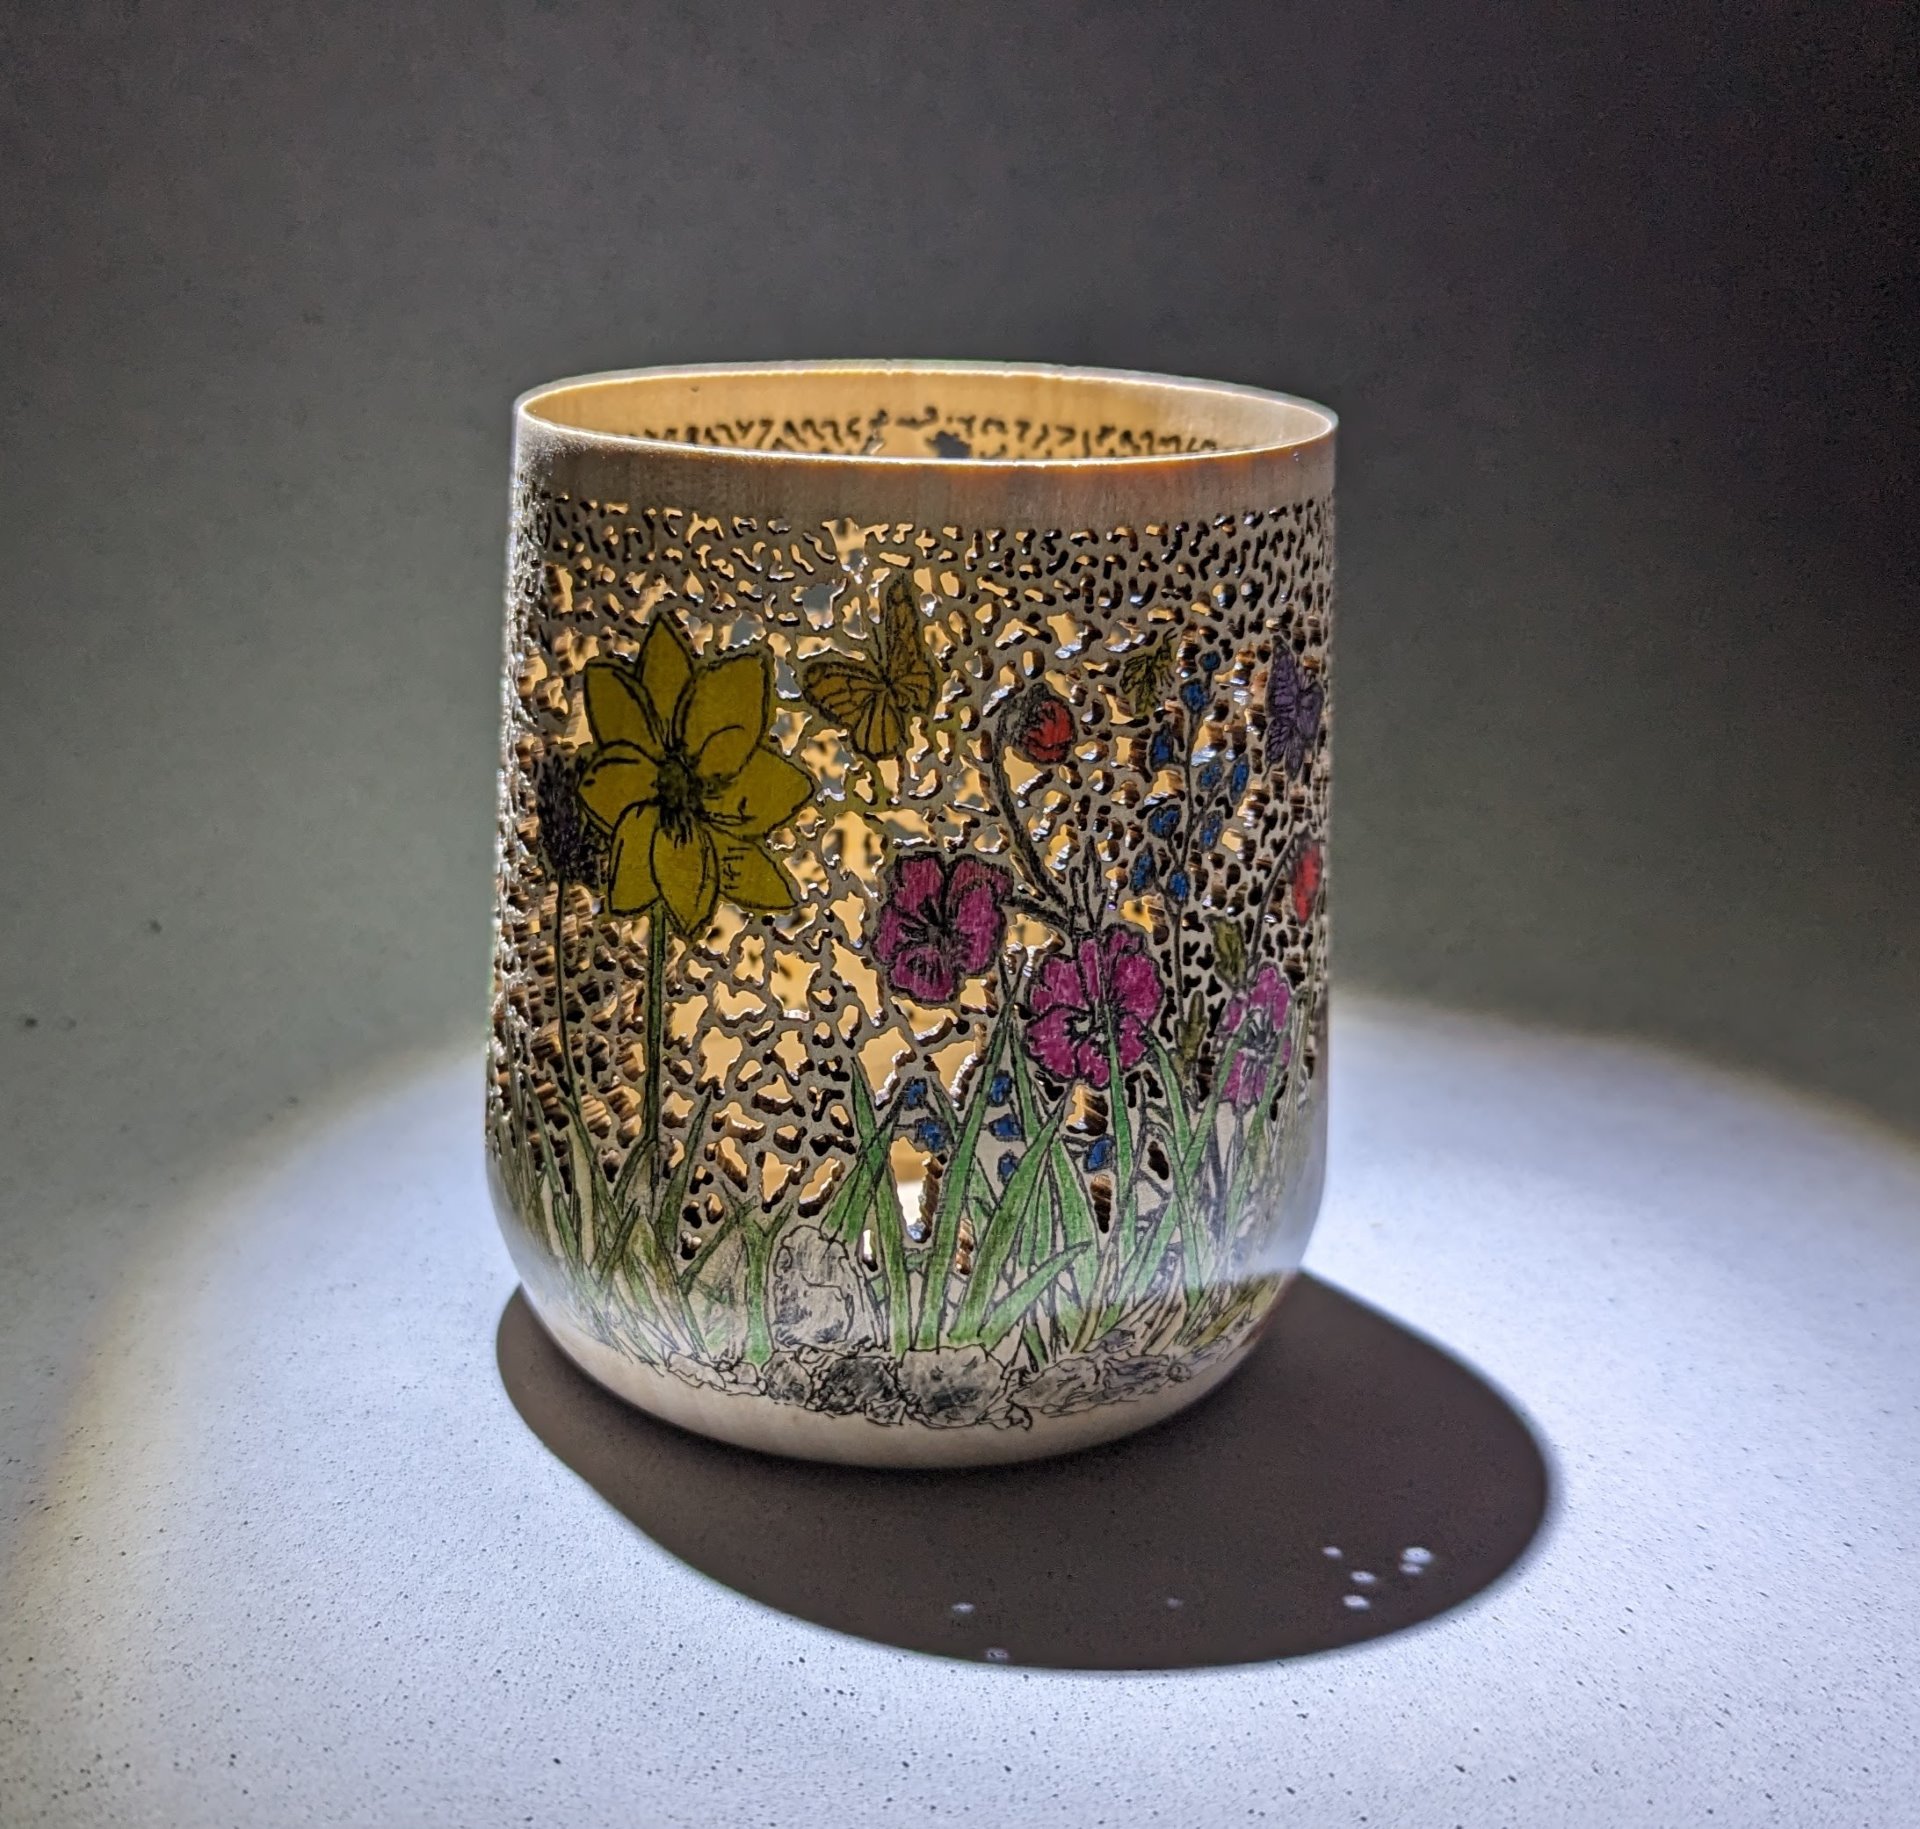 Madrone Meadow Luminary view with spotlight